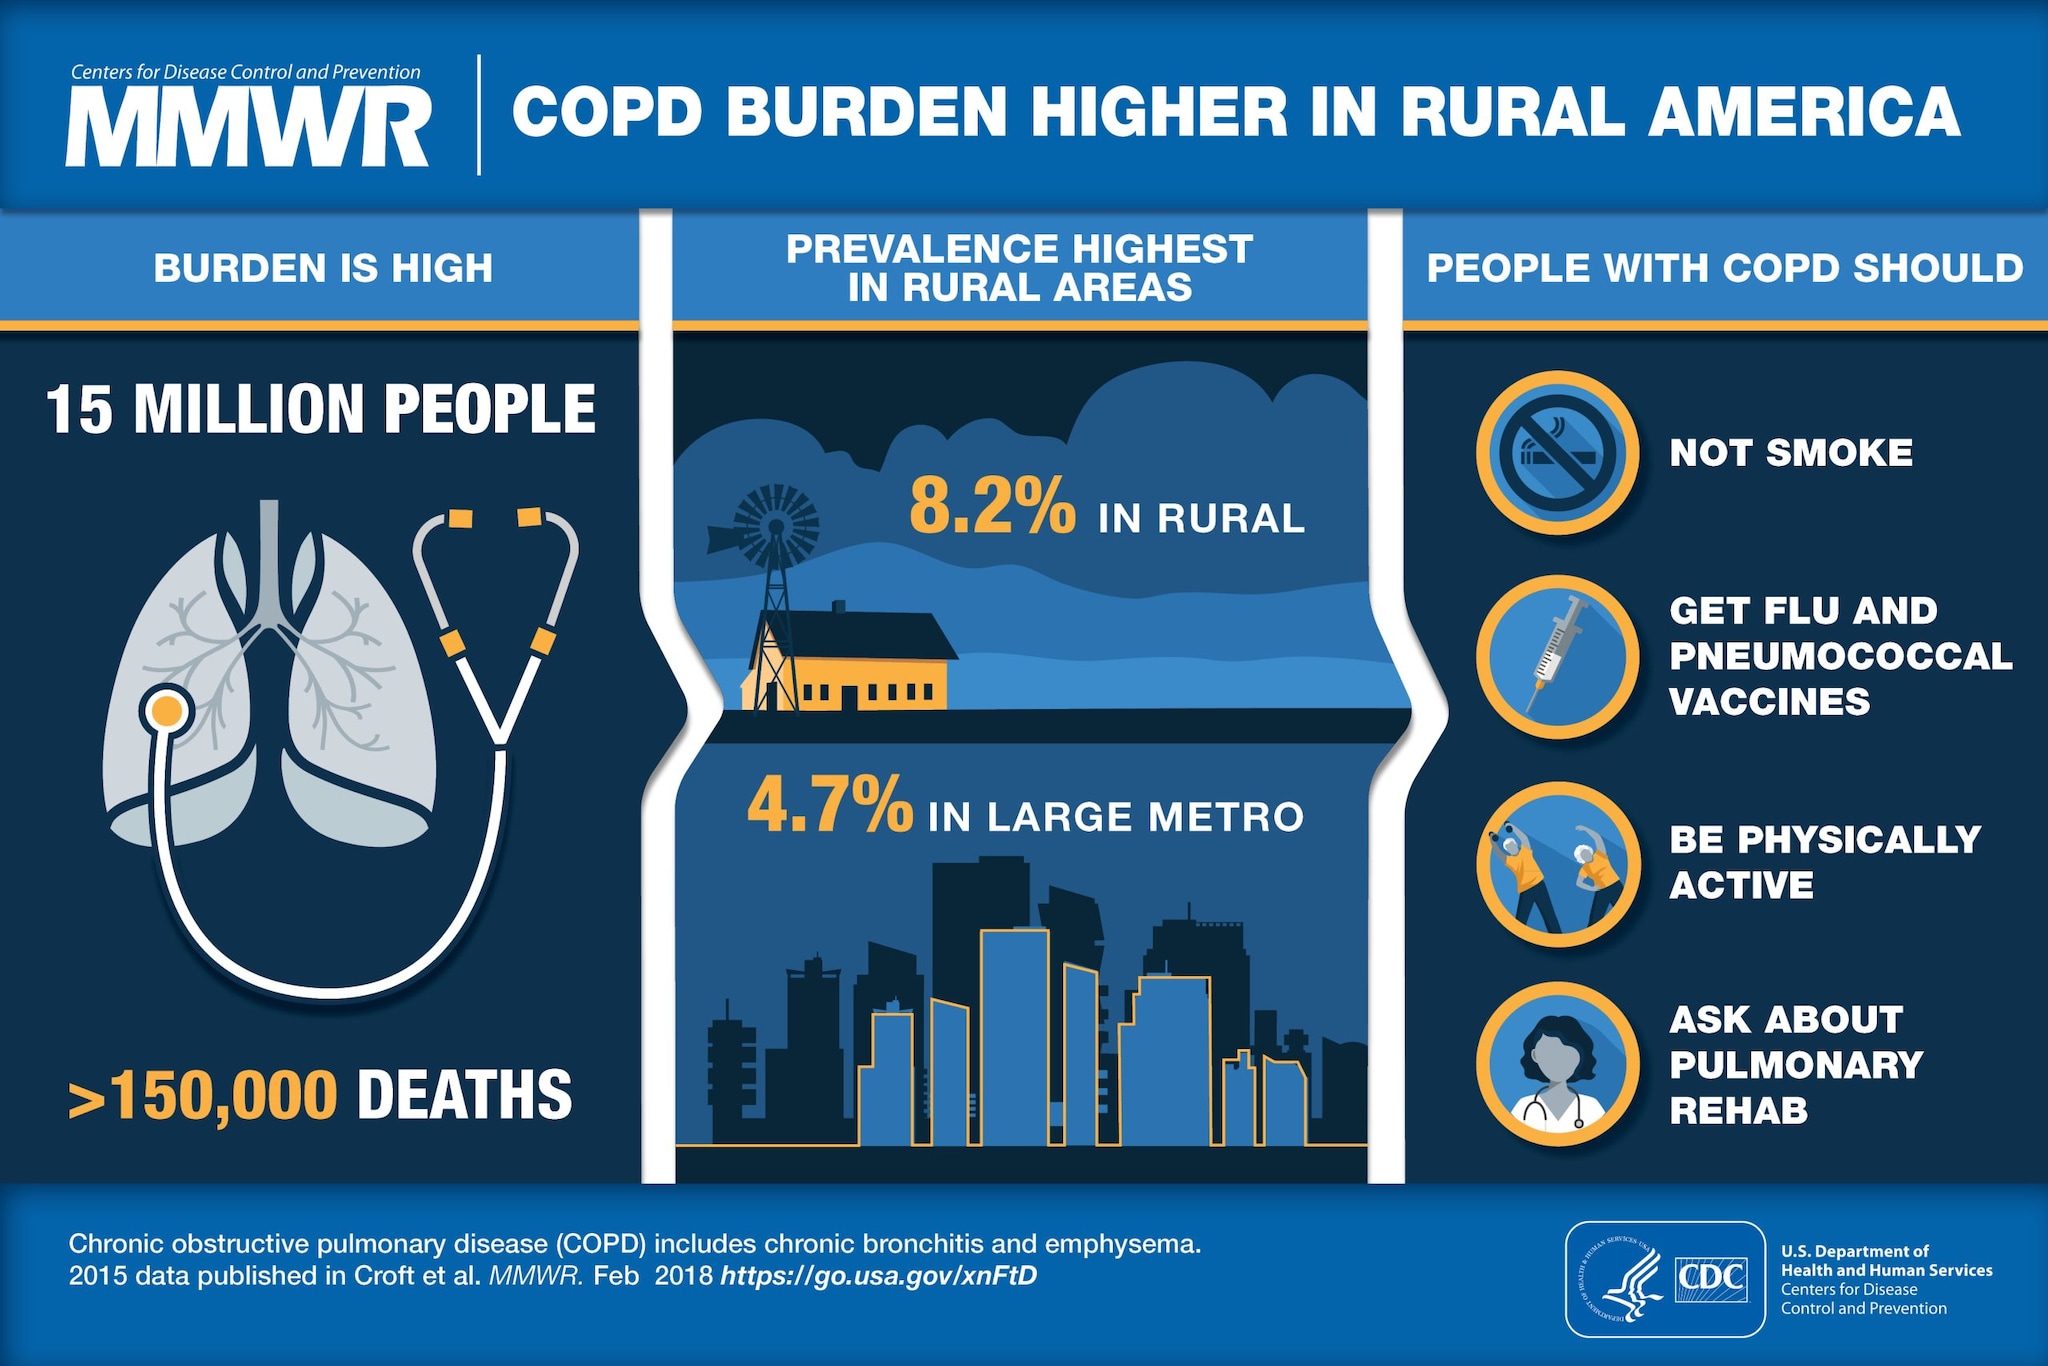 CDC Morbidity and Mortality Weekly Report infographic with the following statistics about the COPD burden in rural America during 2015: There were 15 million people in rural America with COPD and more than 150,000 deaths. Rural Americans had COPD at a rate of 8.2% as opposed to 4.7% of people who live in large metro areas. People with COPD should not smoke, get flu and pneumococcal vaccines, be physically active, and ask about pulmonary rehab. Note: COPD includes chronic bronchitis and emphysema. 2015 data published in Croft et al. MMWR, Feb 2018 https://go.use/gov/xnFtD.